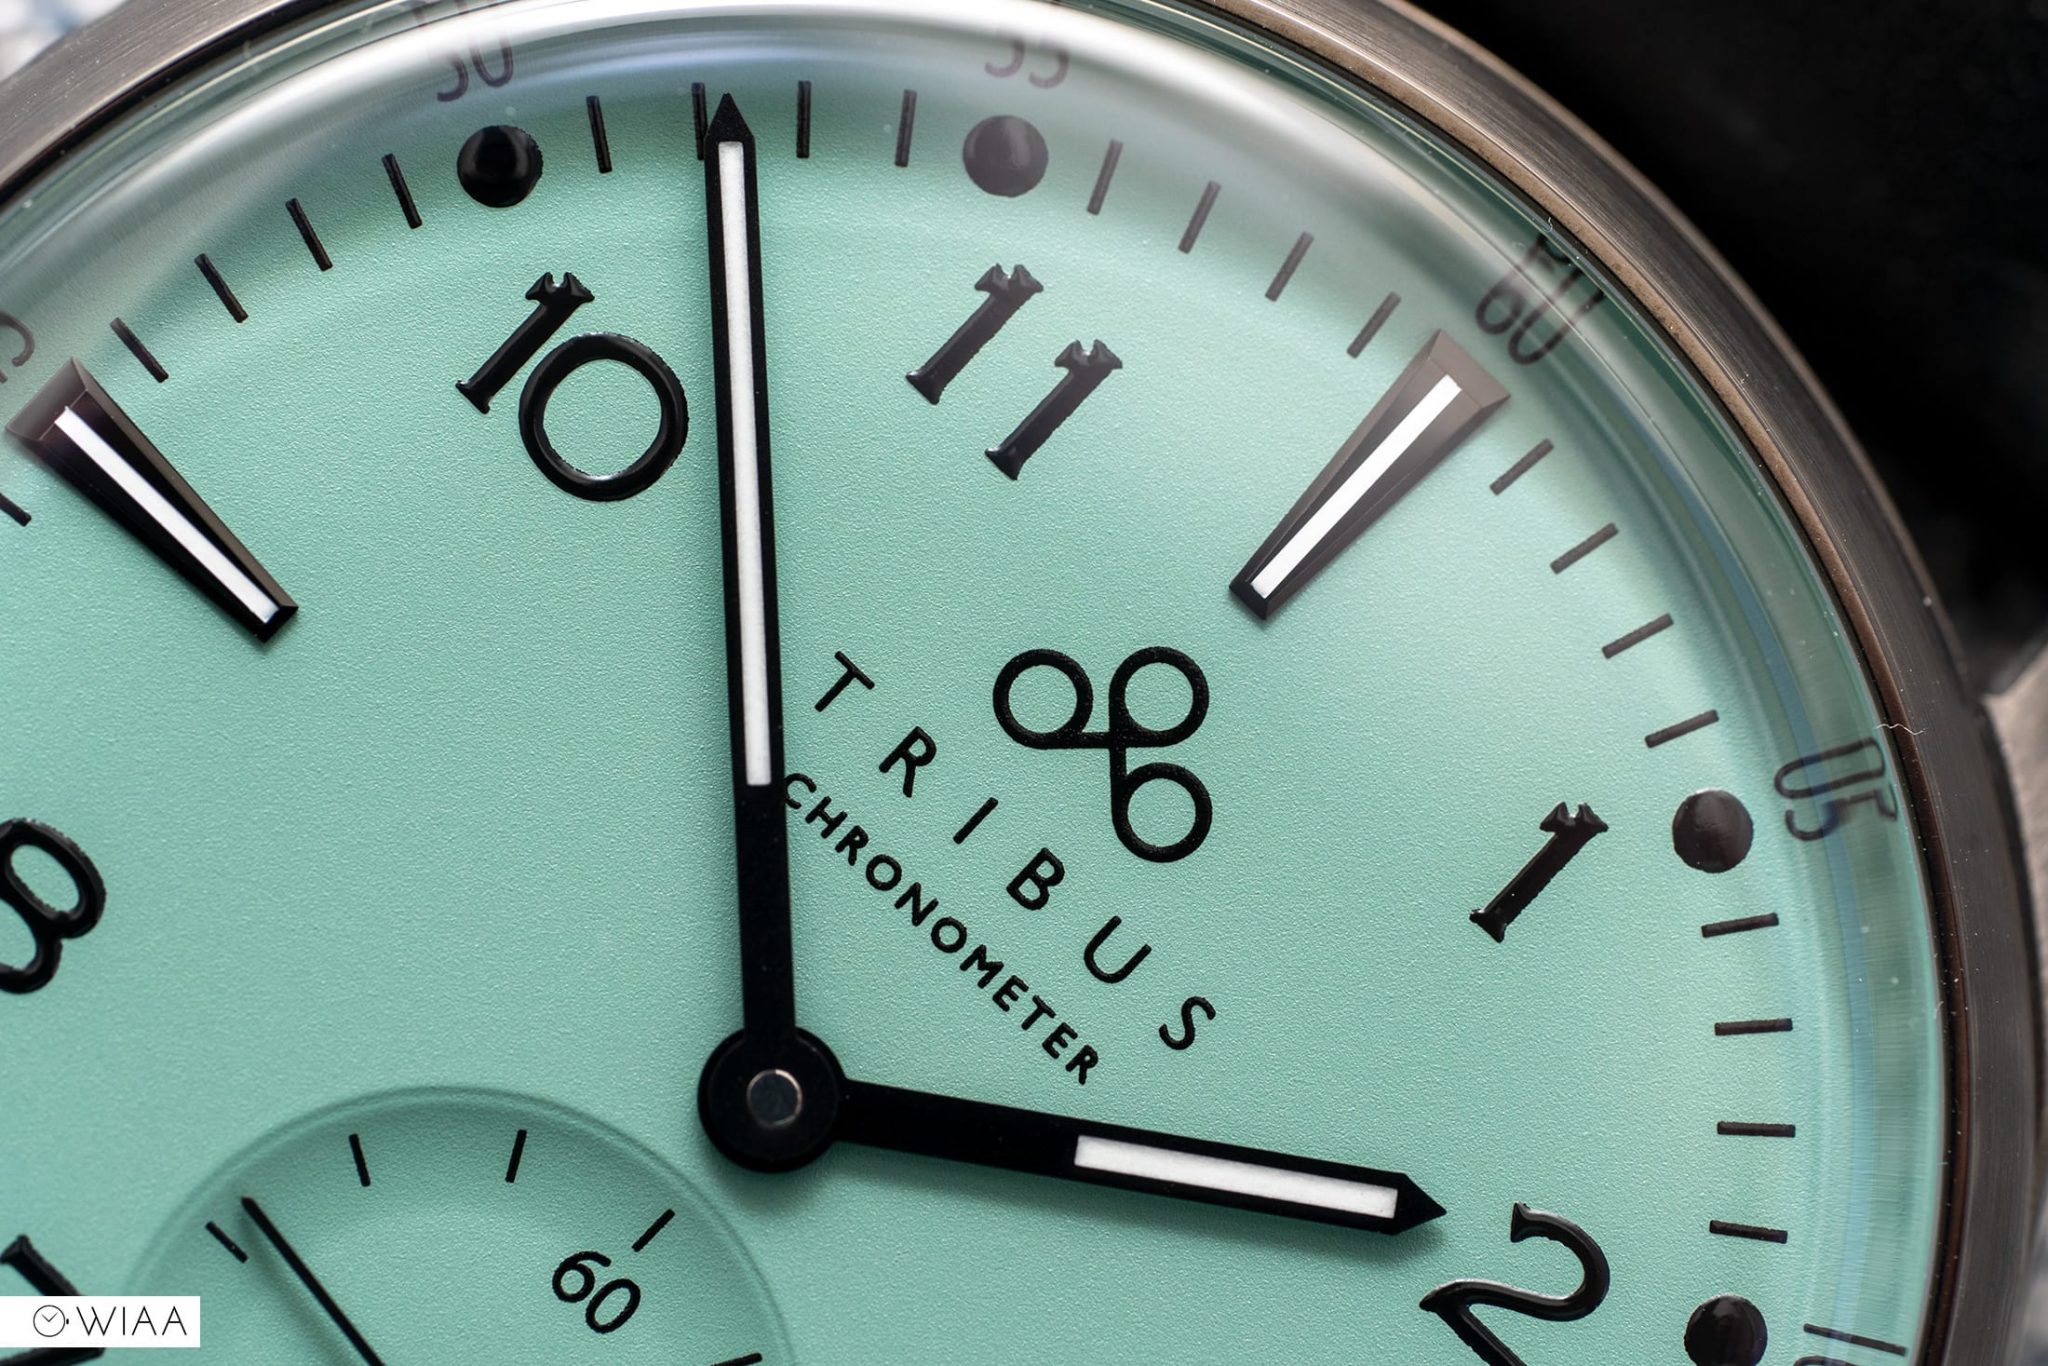 Tribus TRI-01 Teal Watch Review